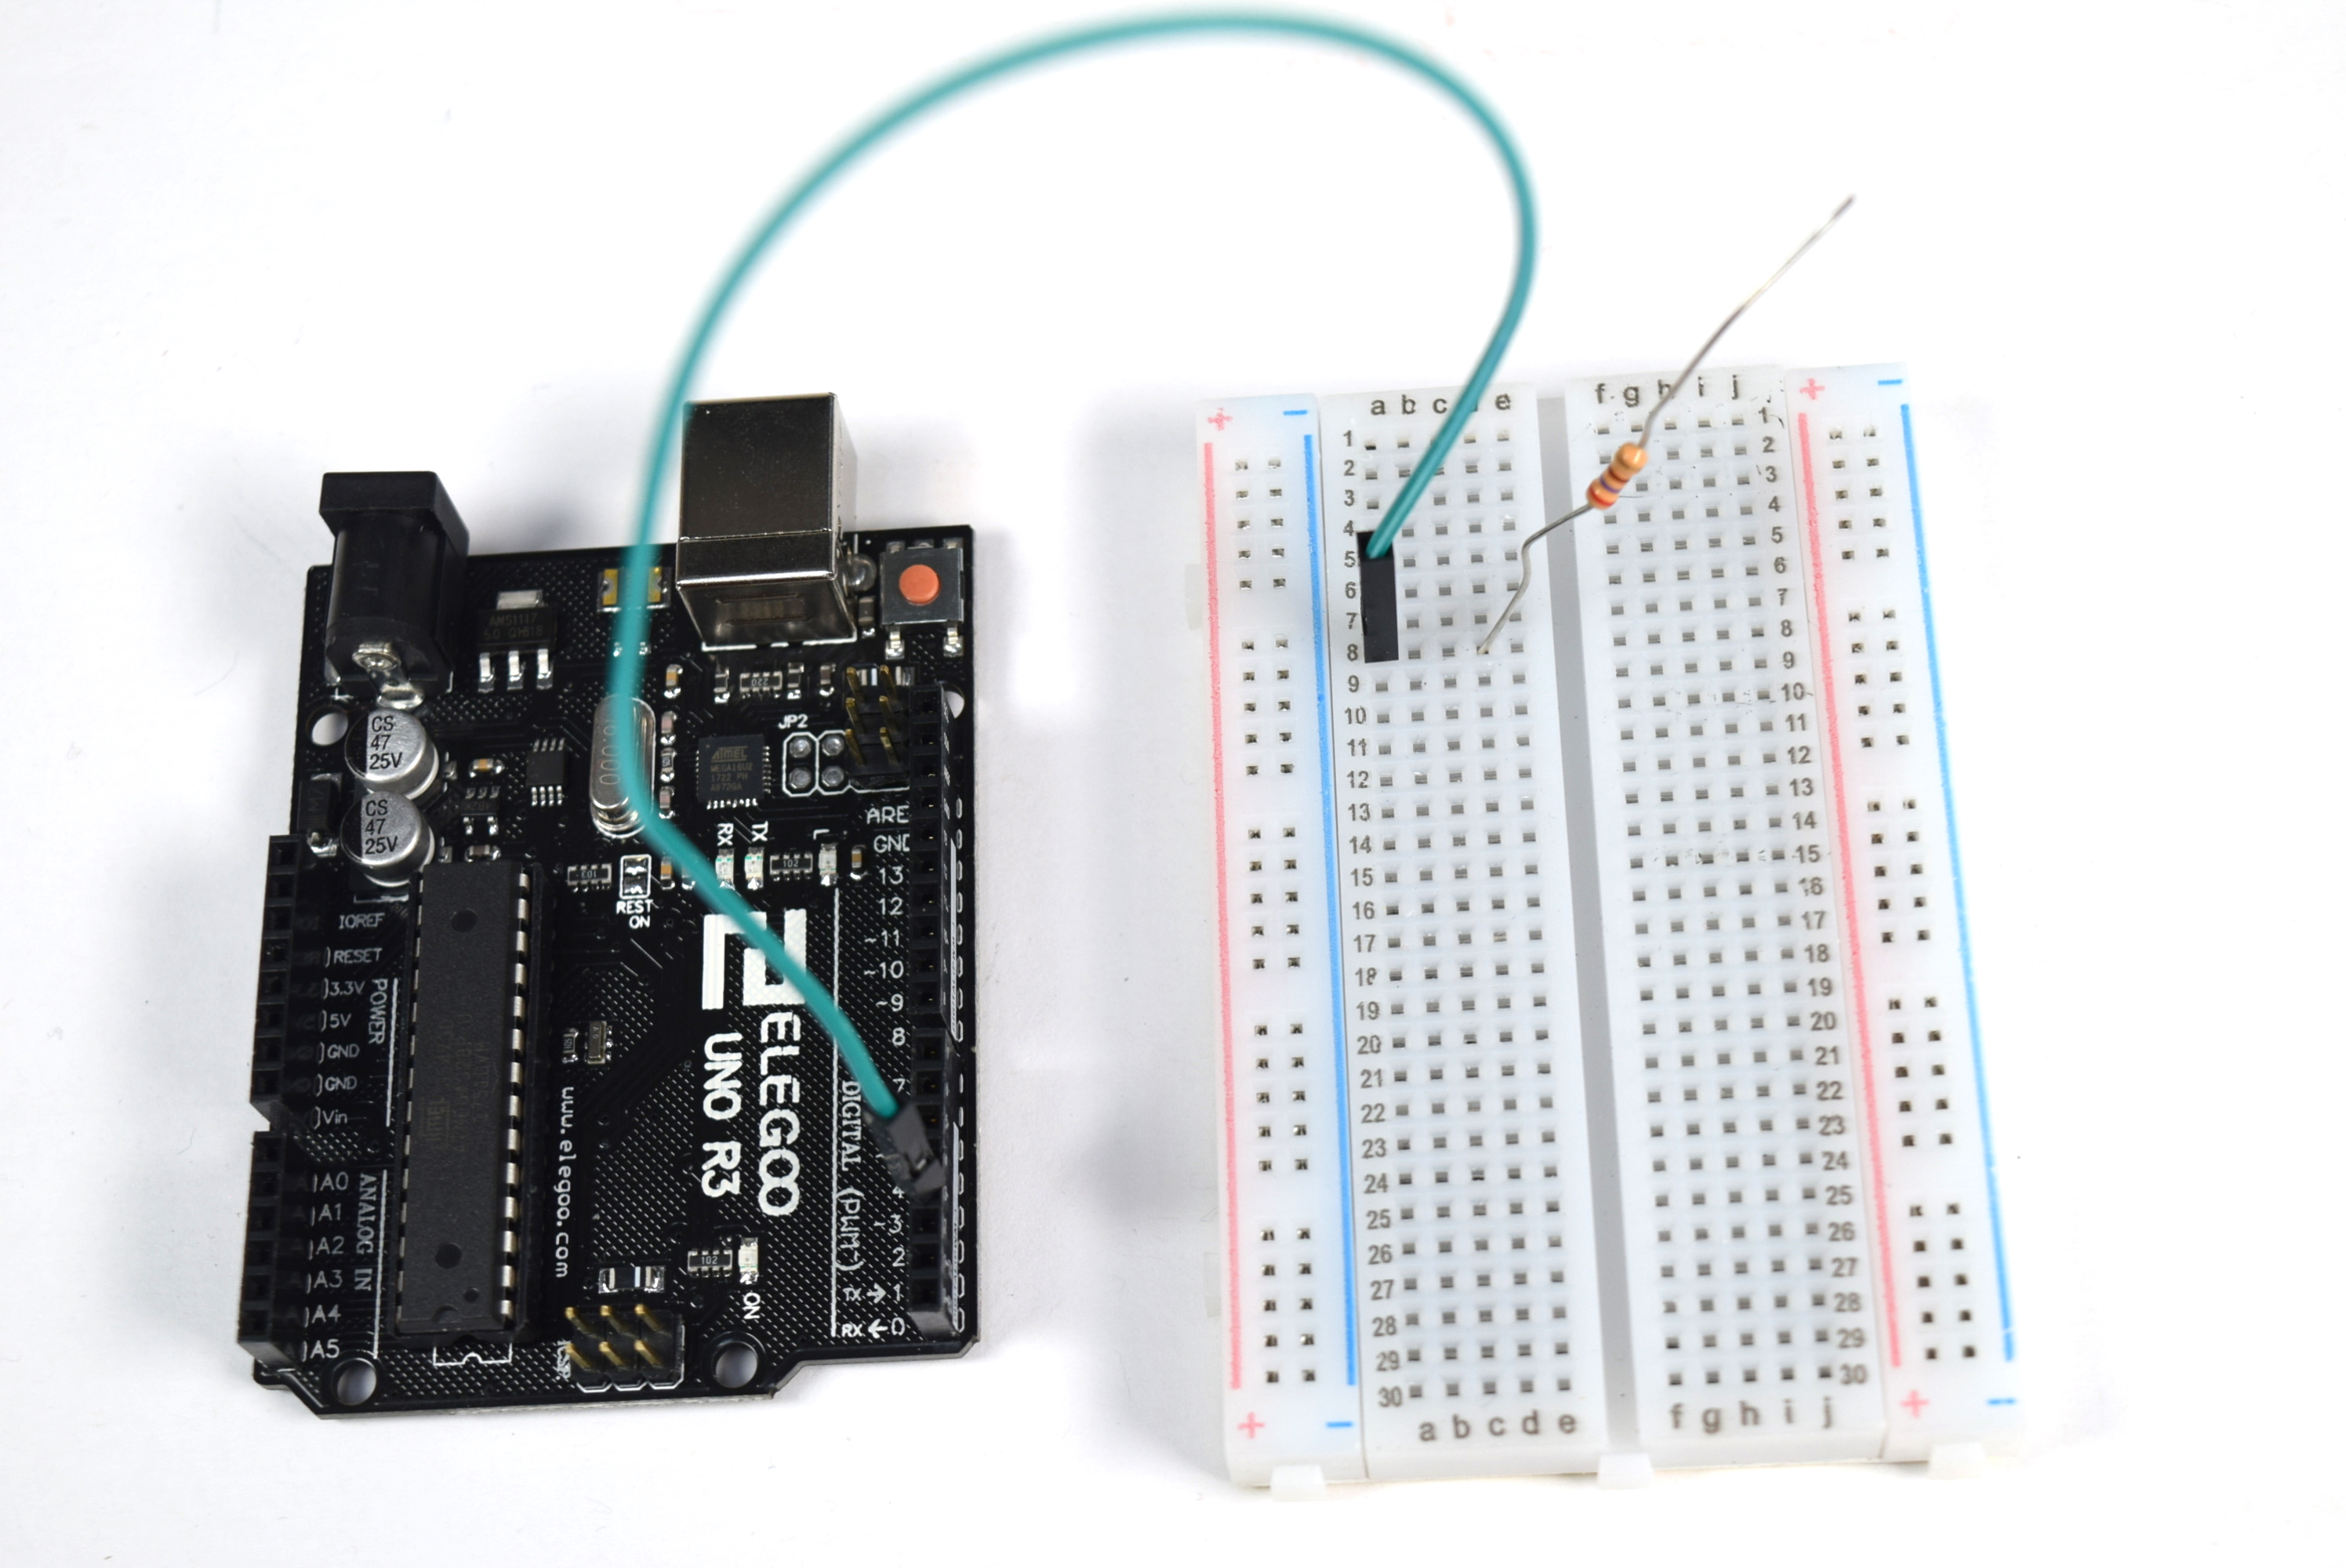 Photograph of a jumper going from Arduino pin 3 to position A8 on a medium sized breadboard, and one leg of a 270Ω resistor plugged into position D8